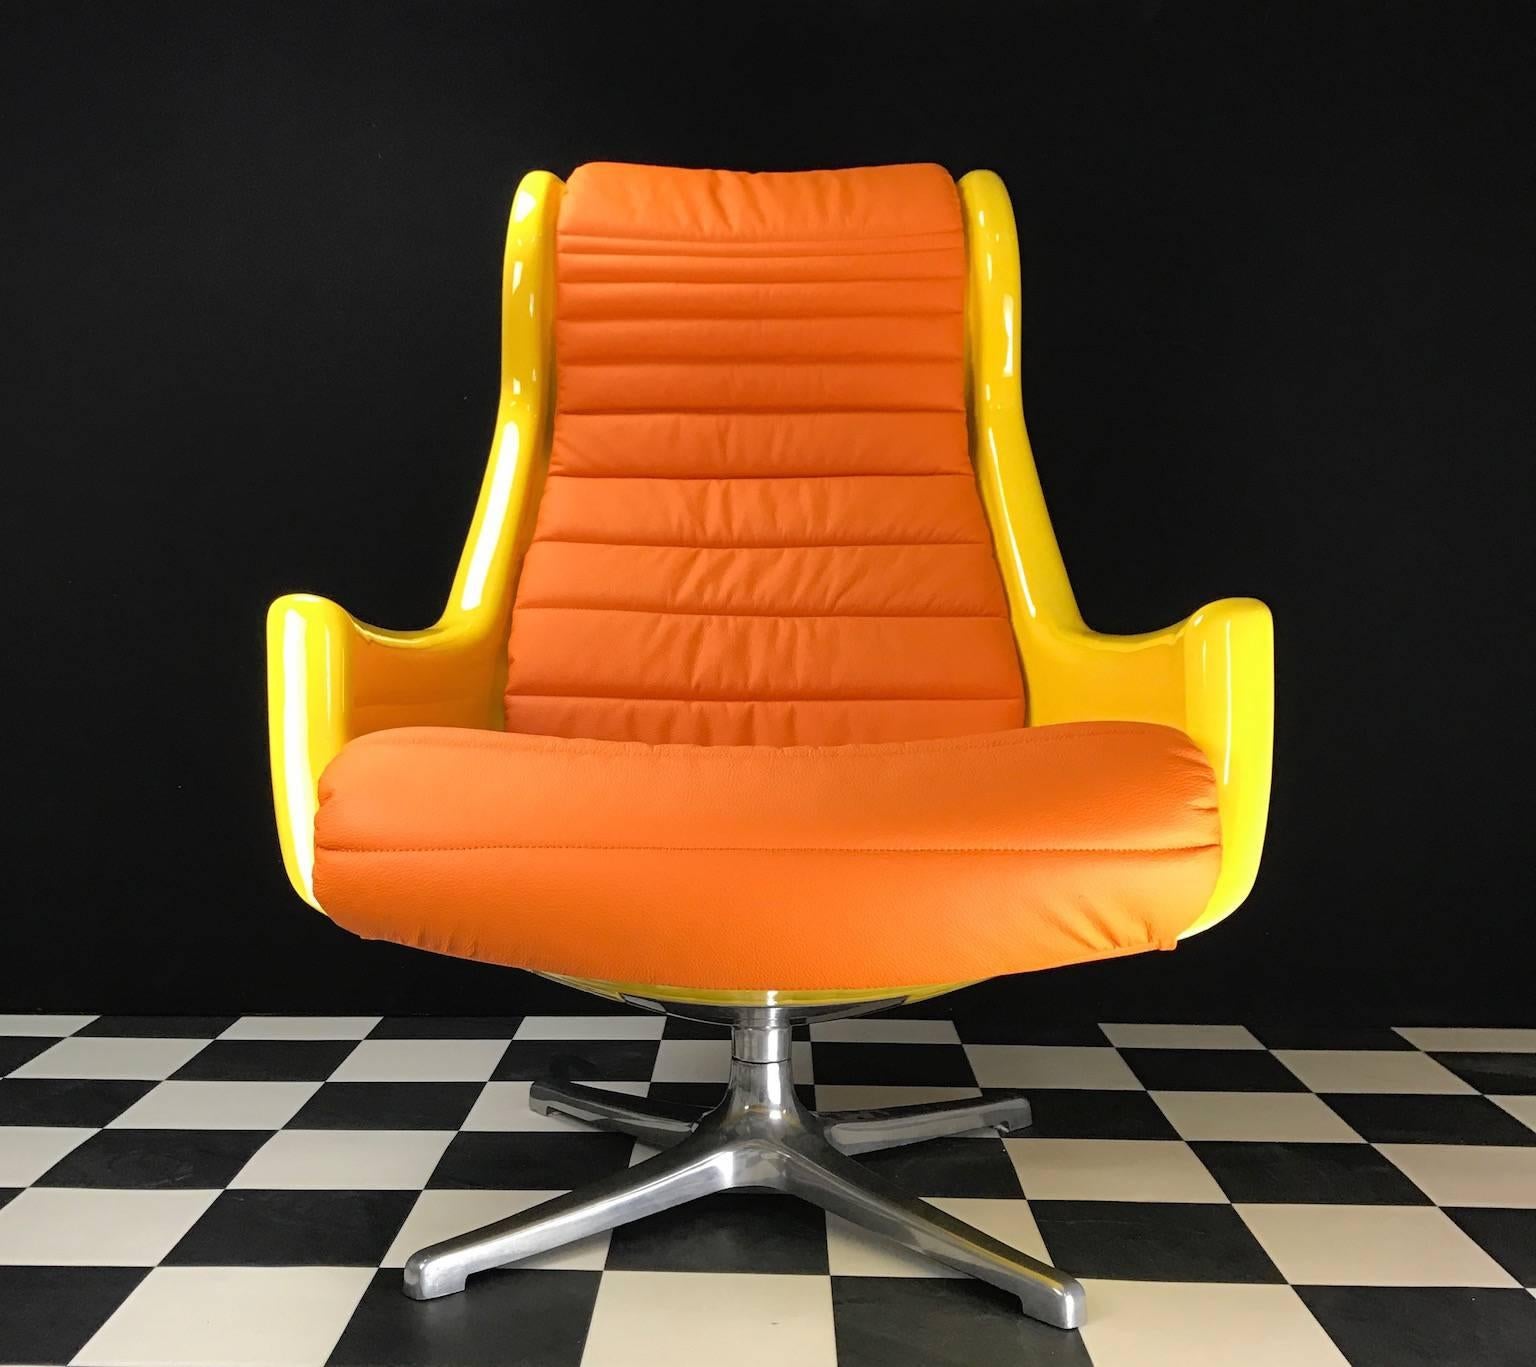 Produced in the period from 1970-1979 by Alf Svensson and Yngve Sandström for DUX of Sweden.

This unique swivel chair has been totally renewed with new designed cushions and five layers of Alfa Romeo racing paint.

Beautiful orange aniline